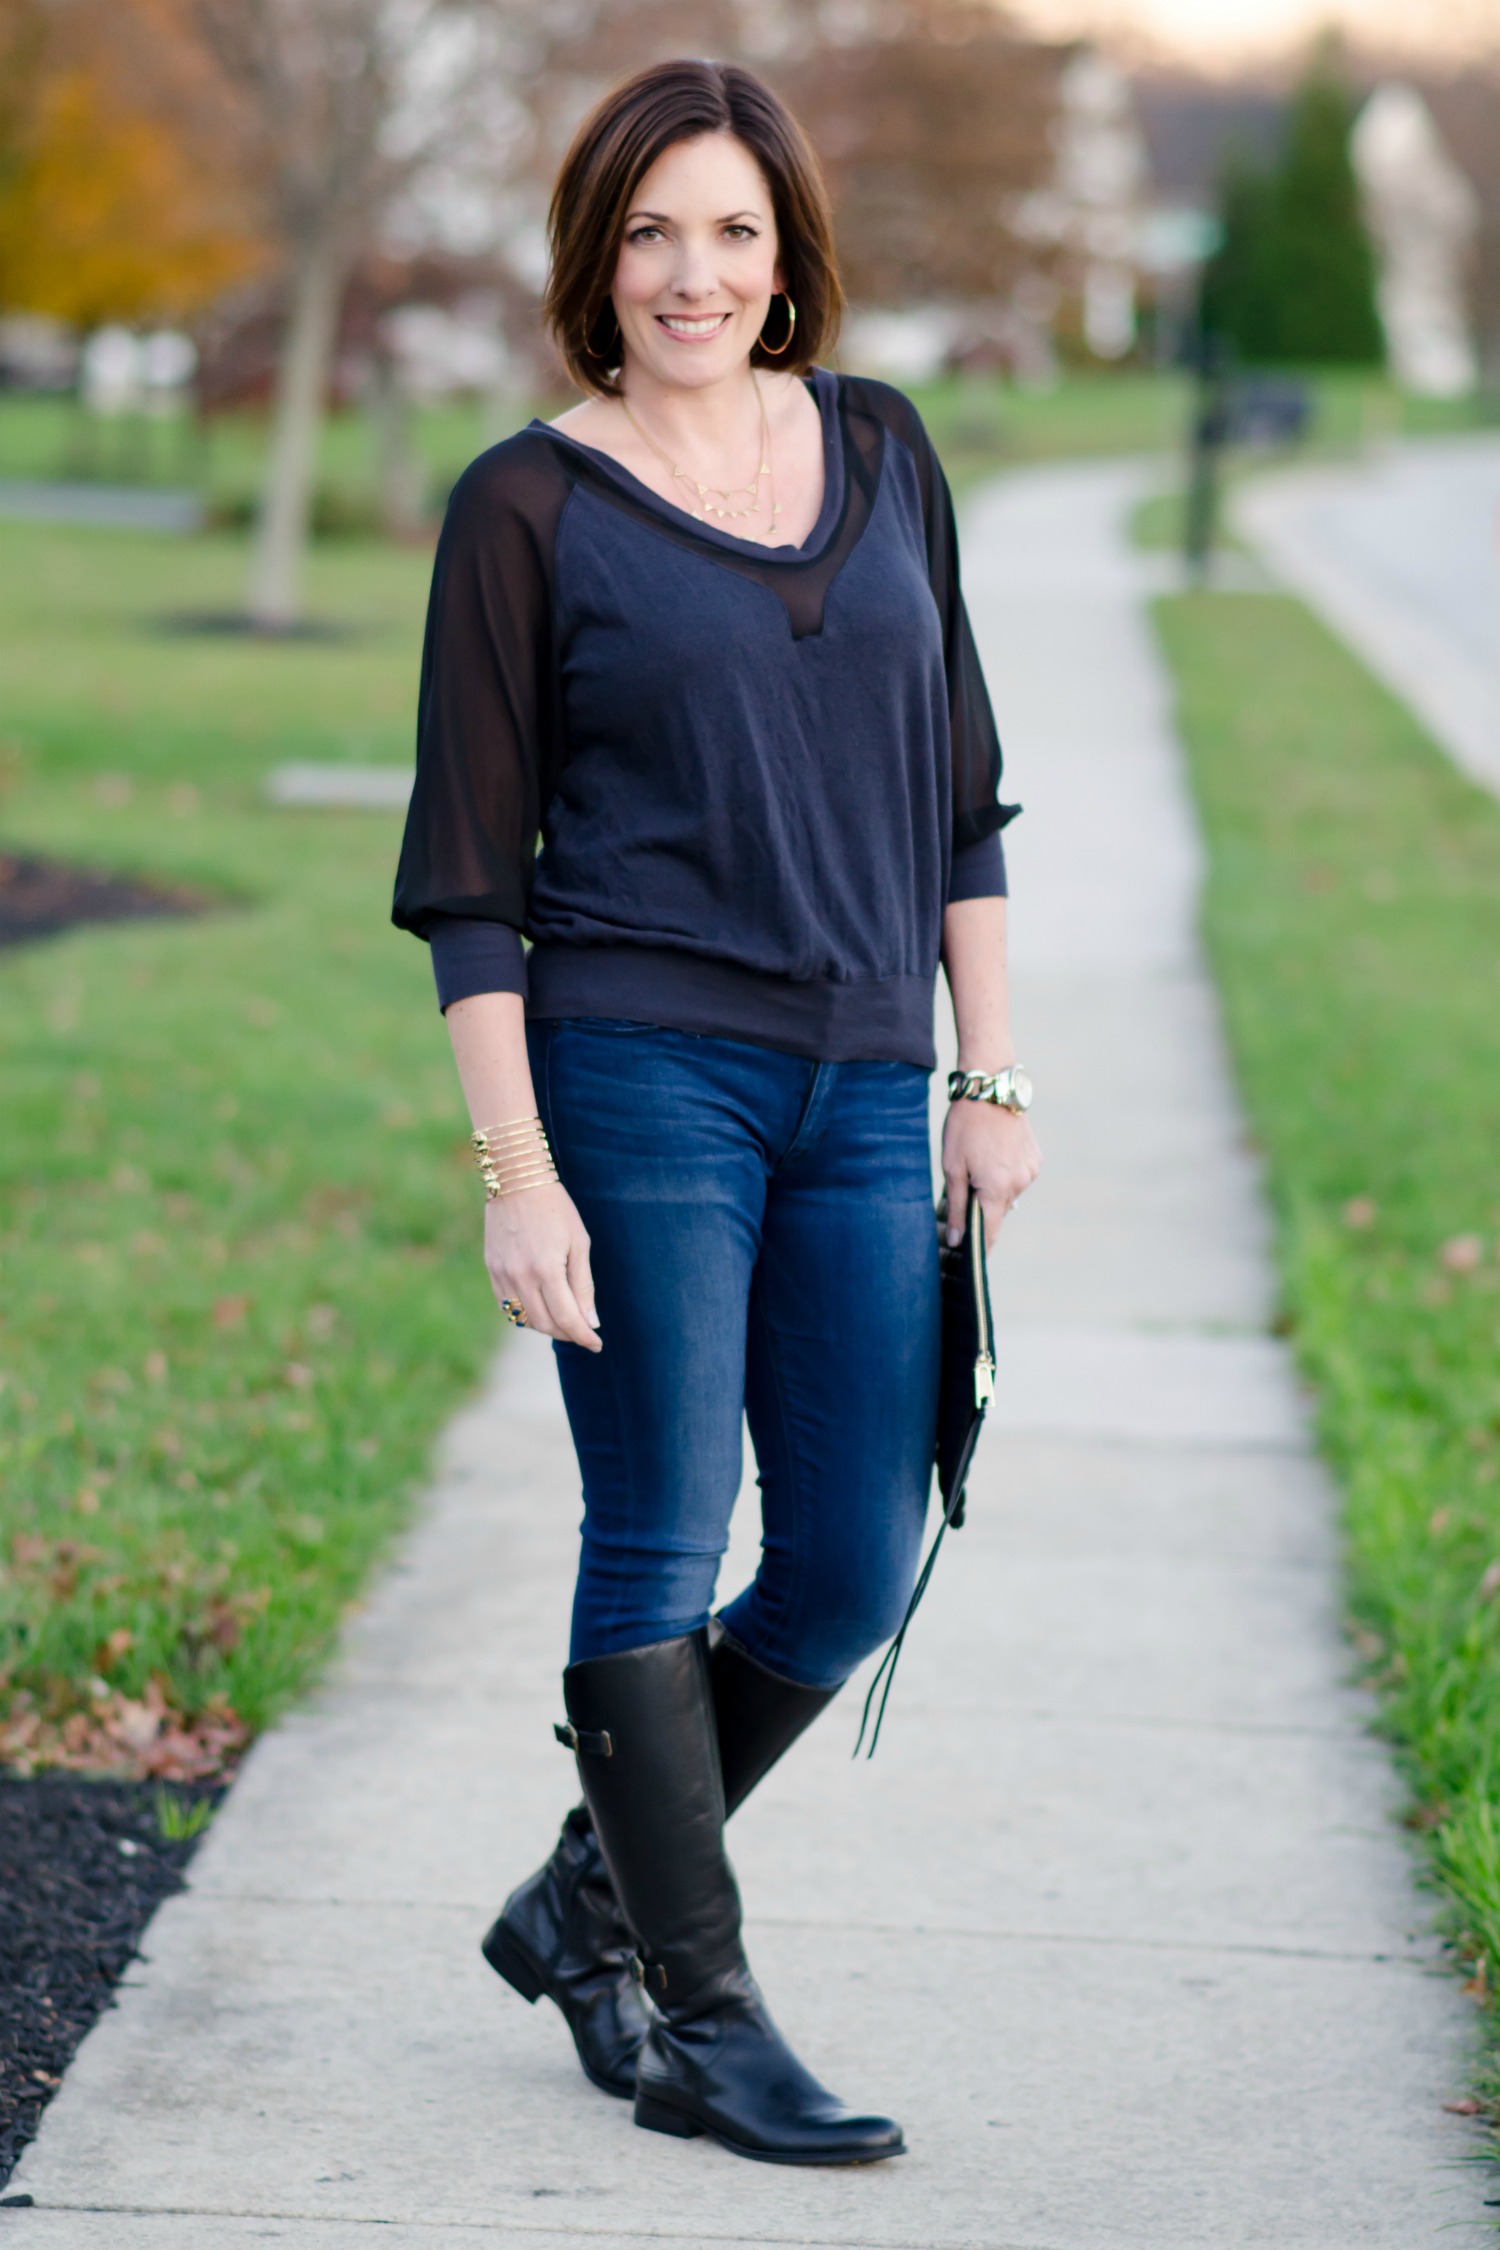 What I Wore: Date Night Outfit featuring black leather jacket, mixed media top from LeTote, skinny jeans, and riding boots